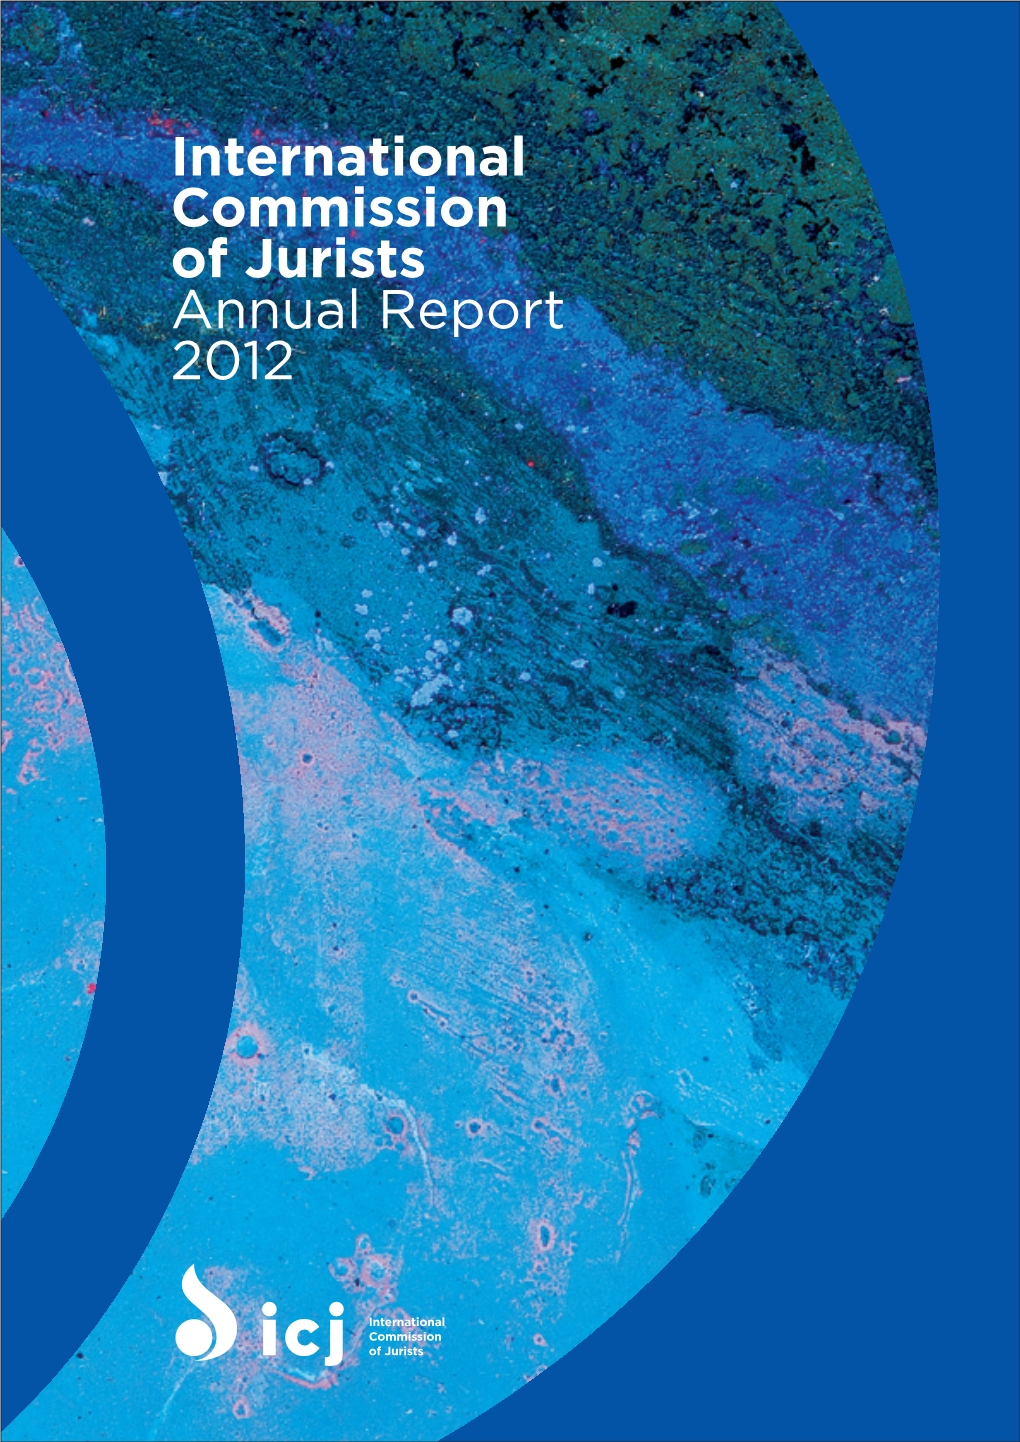 International Commission of Jurists Annual Report 2012 Vision